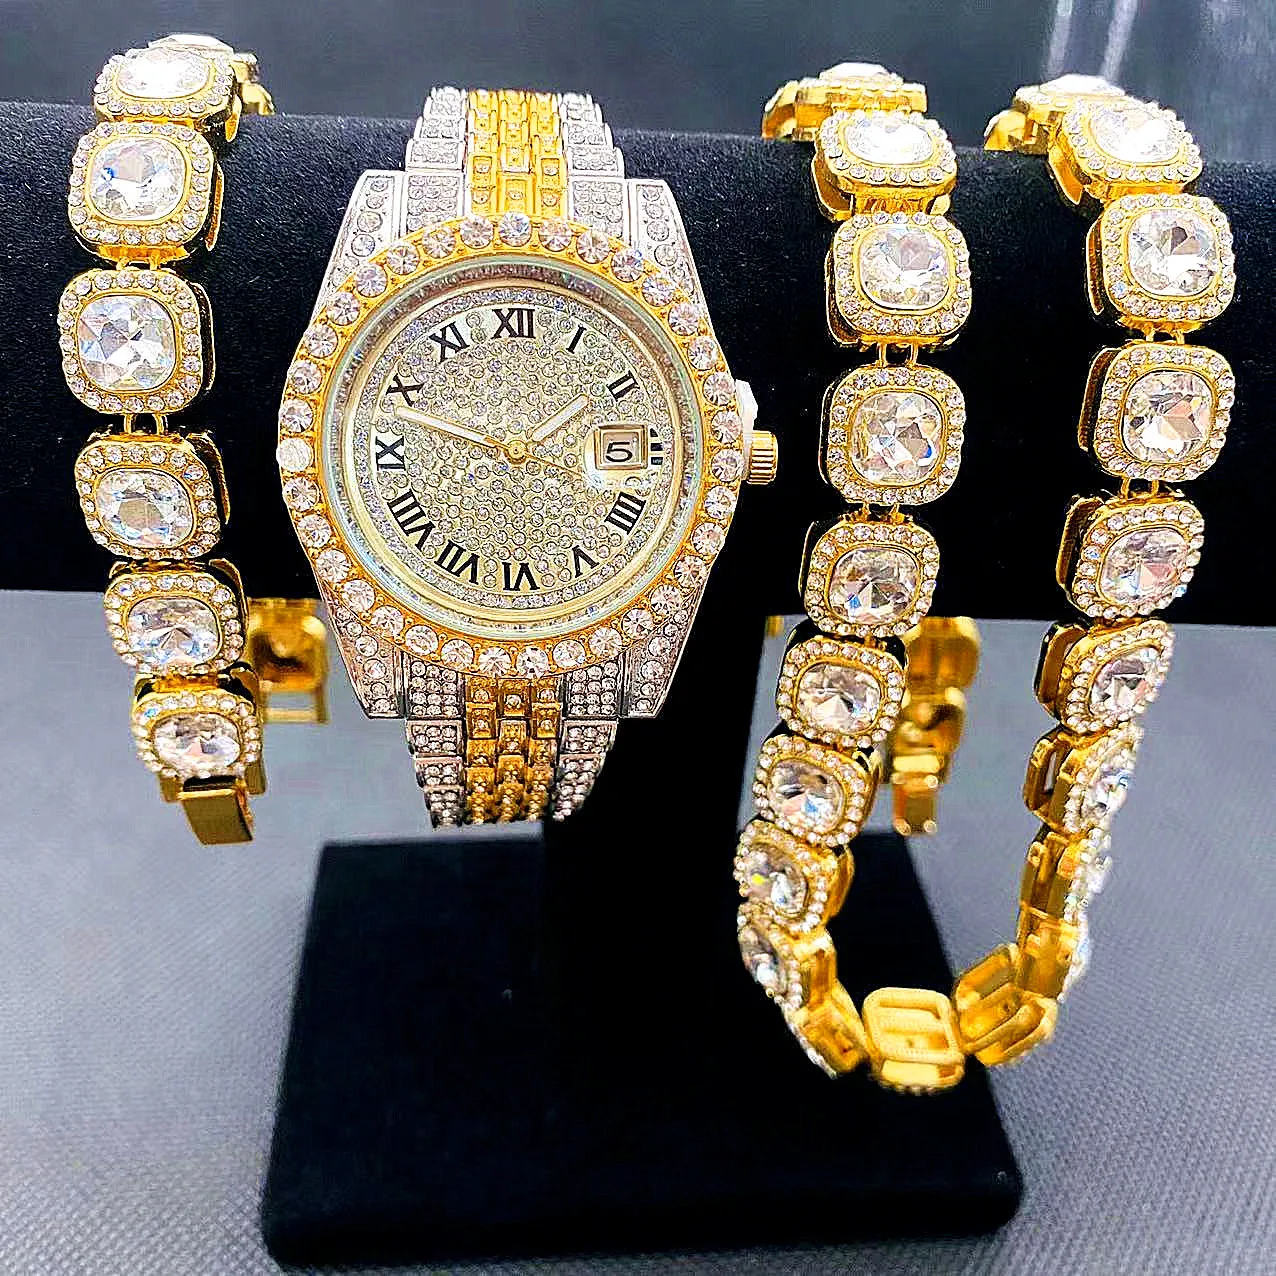 3PCS Full Iced Out Watches Gold Cuban Tennis Chain Bracelet Necklaces Bling Watch for Mens Hip Hop Jewelry Set Men Watch Clock 2pcs set iced out watch tennis bracelet for men women luxury cool hip hop gold mens watch set clock watches religio masculino